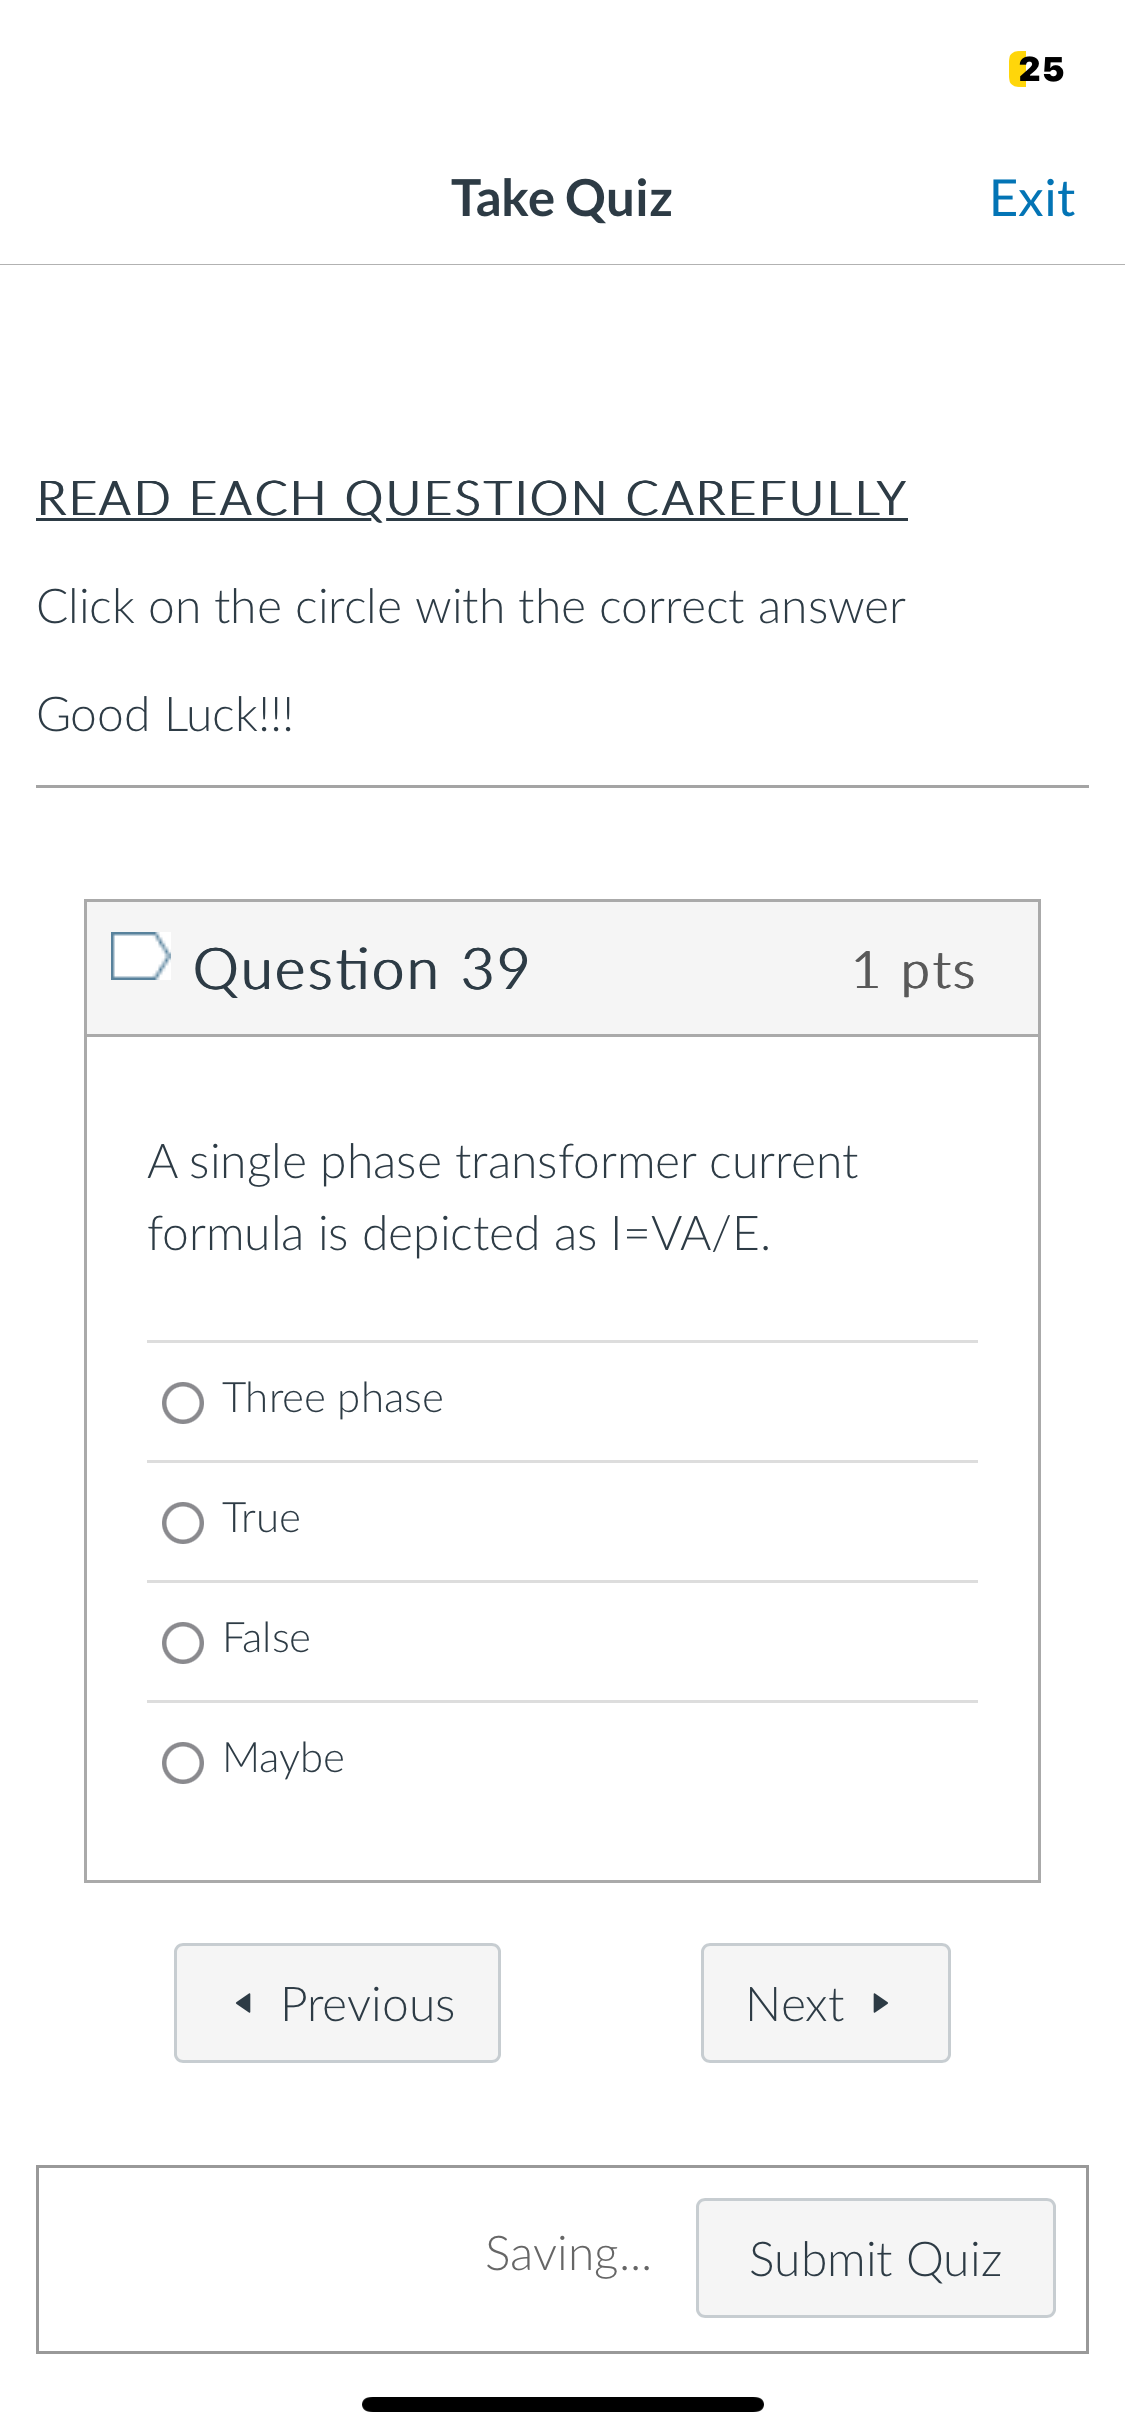 25
Take Quiz
Exit
READ EACH QUESTION CAREFULLY
Click on the circle with the correct answer
Good Luck!!!
Question 39
1 pts
A single phase transformer current
formula is depicted as I=VA/E.
○ Three phase
O True
O False
O Maybe
◄ Previous
Next ▸
Saving...
Submit Quiz